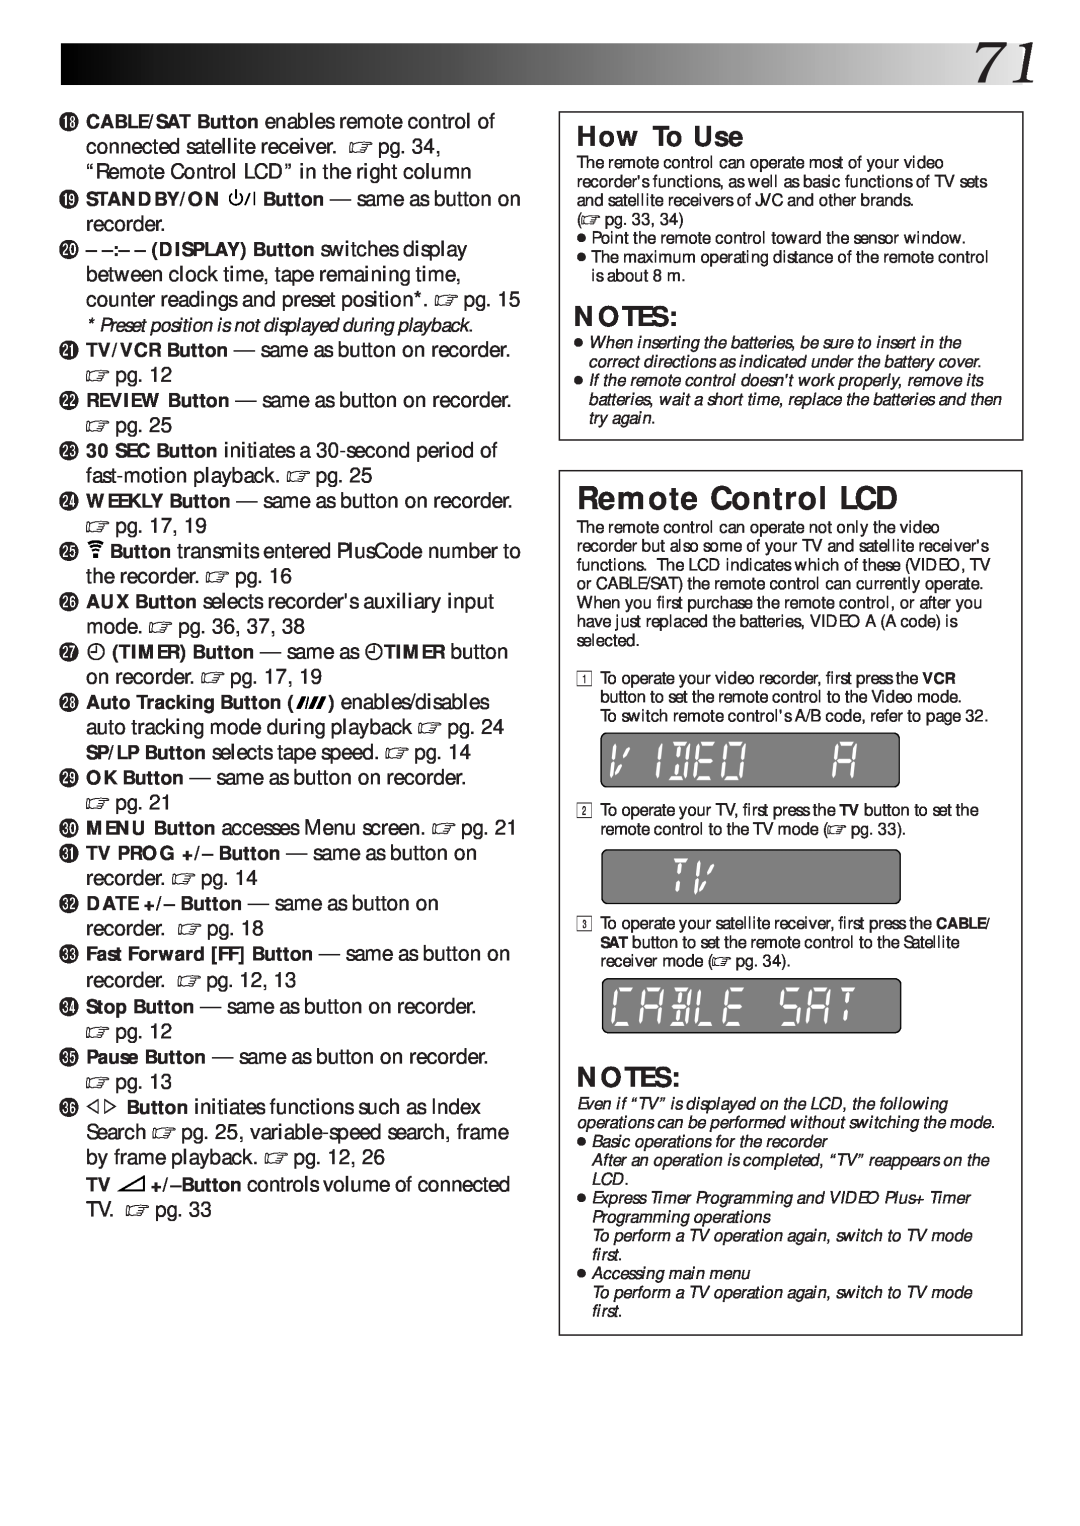 JVC HR-S9600EK setup guide Remote Control LCD, How To Use, u ä TIMER Button - same as äTIMER button on recorder. pg. 17 